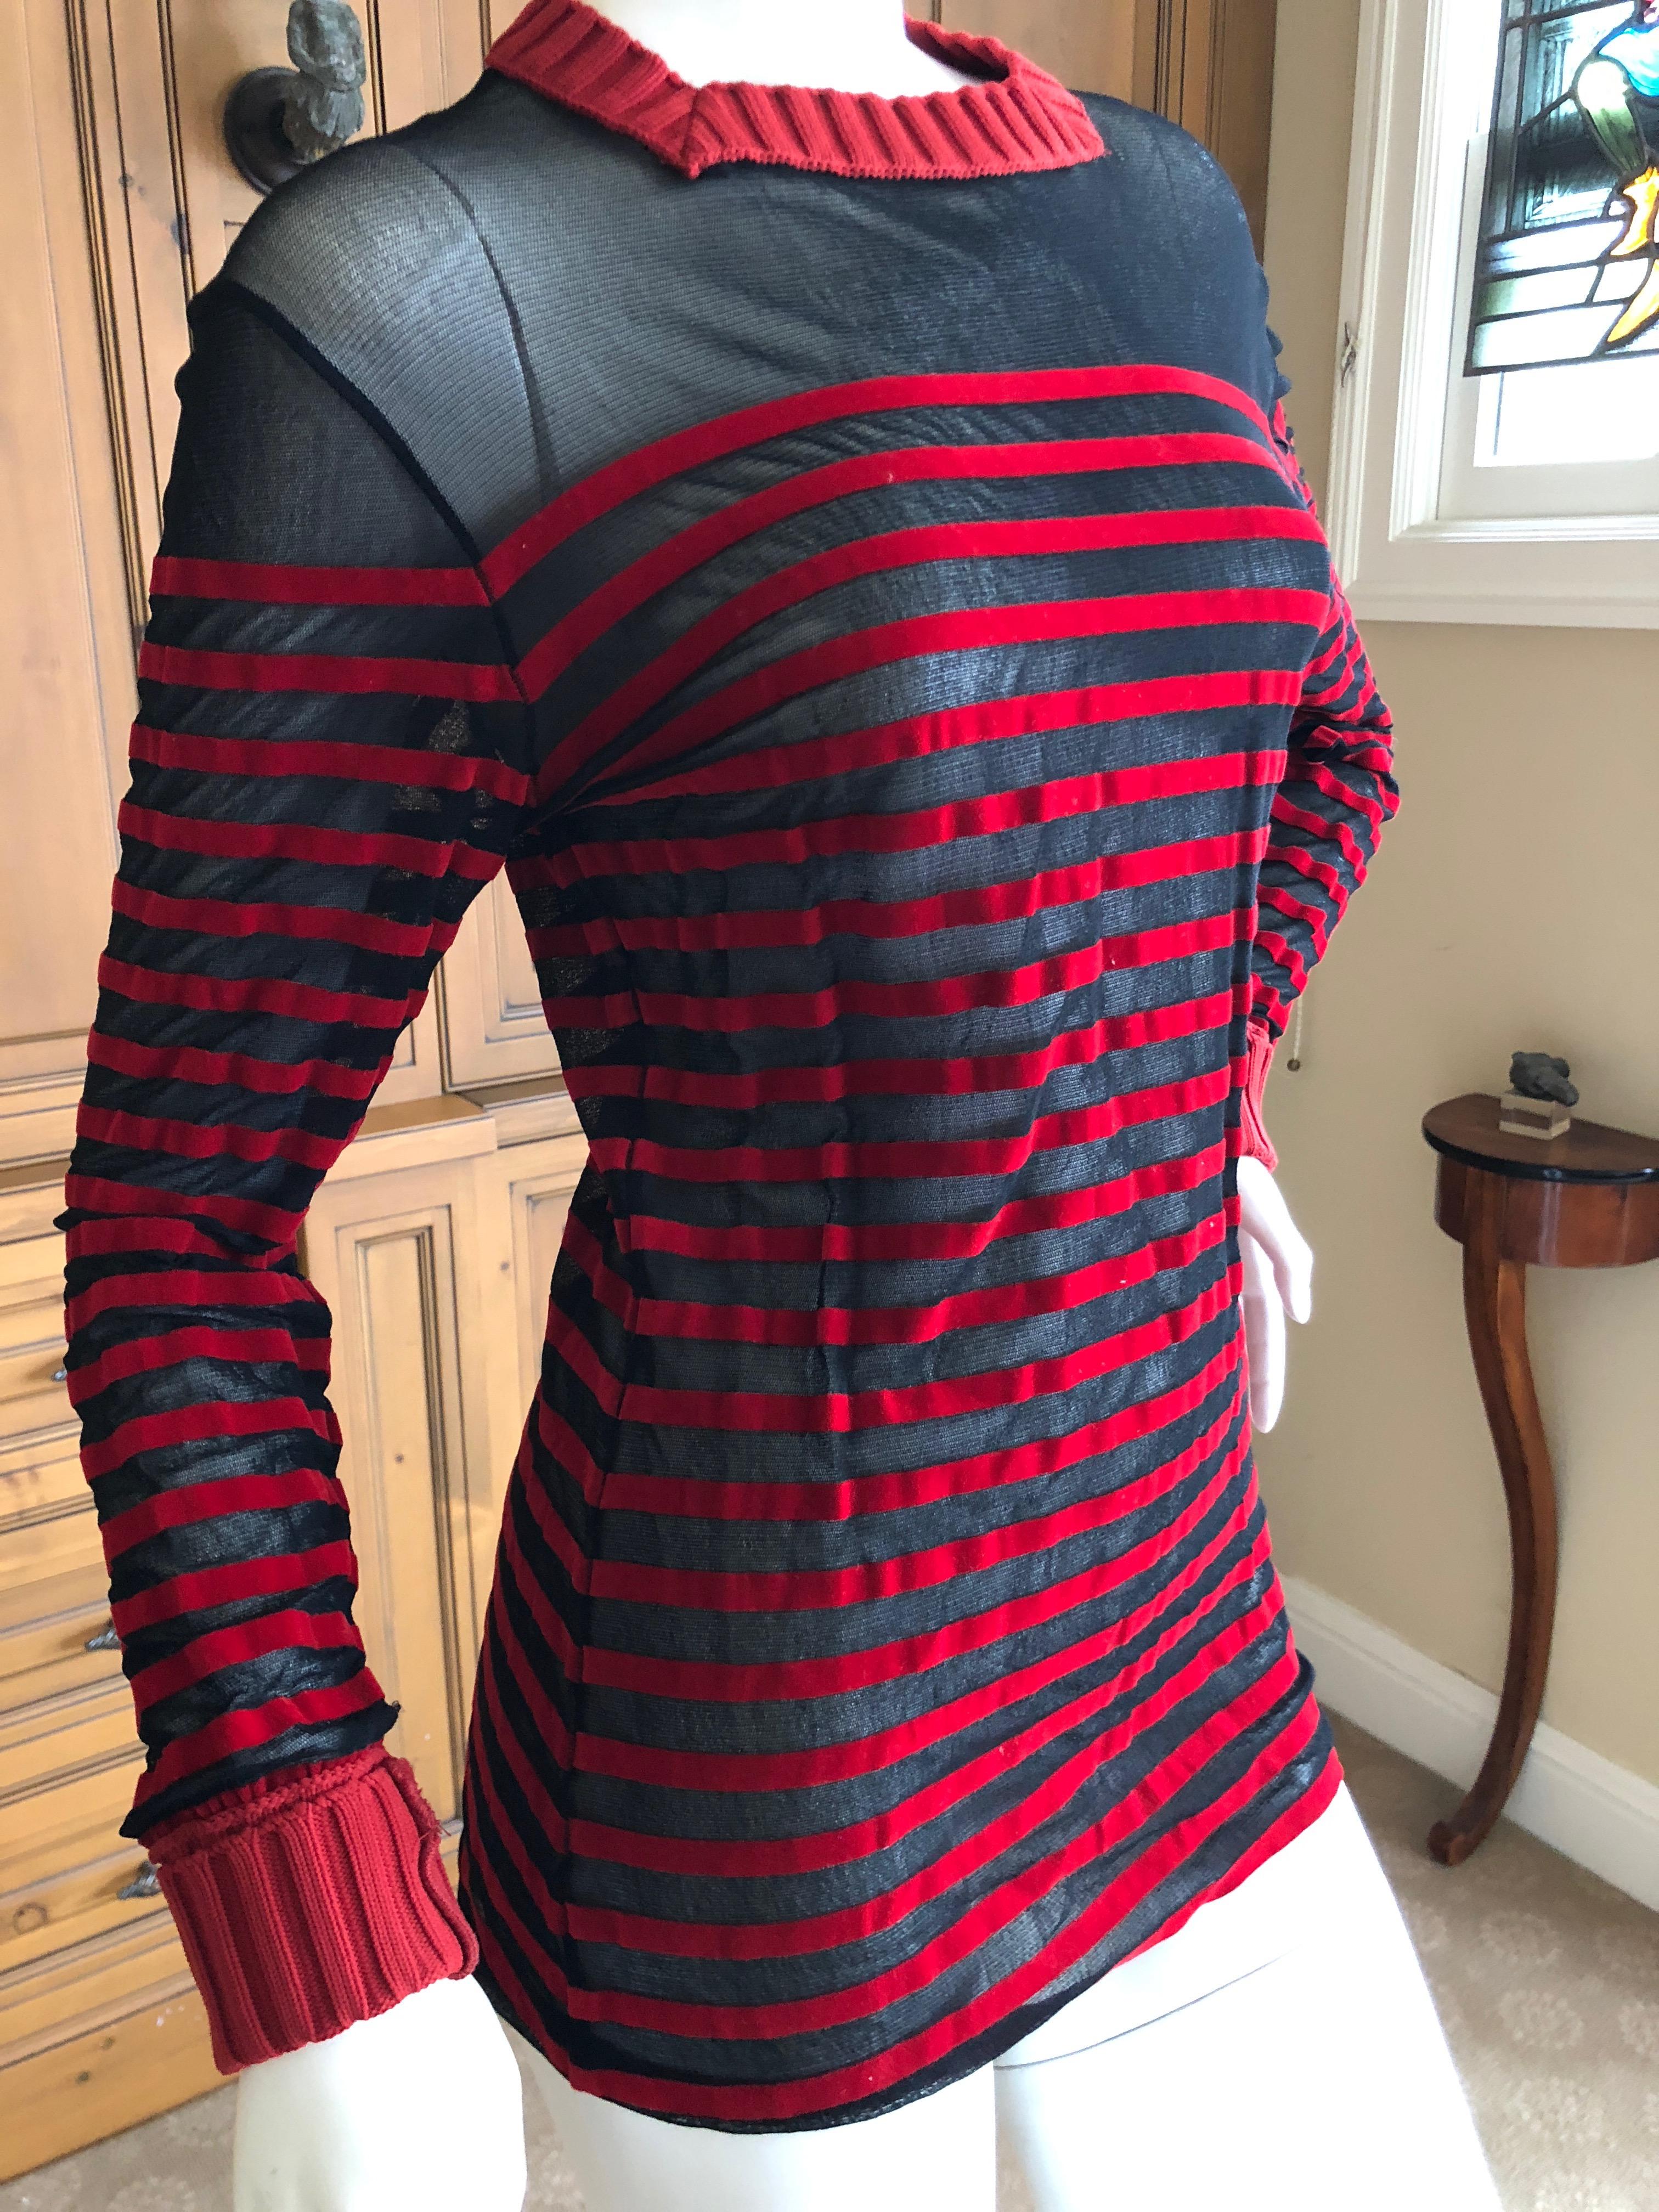 Jean Paul Gaultier Classique stripe shirt with Cable Knit Trim.
Size tag removed.
Bust 34